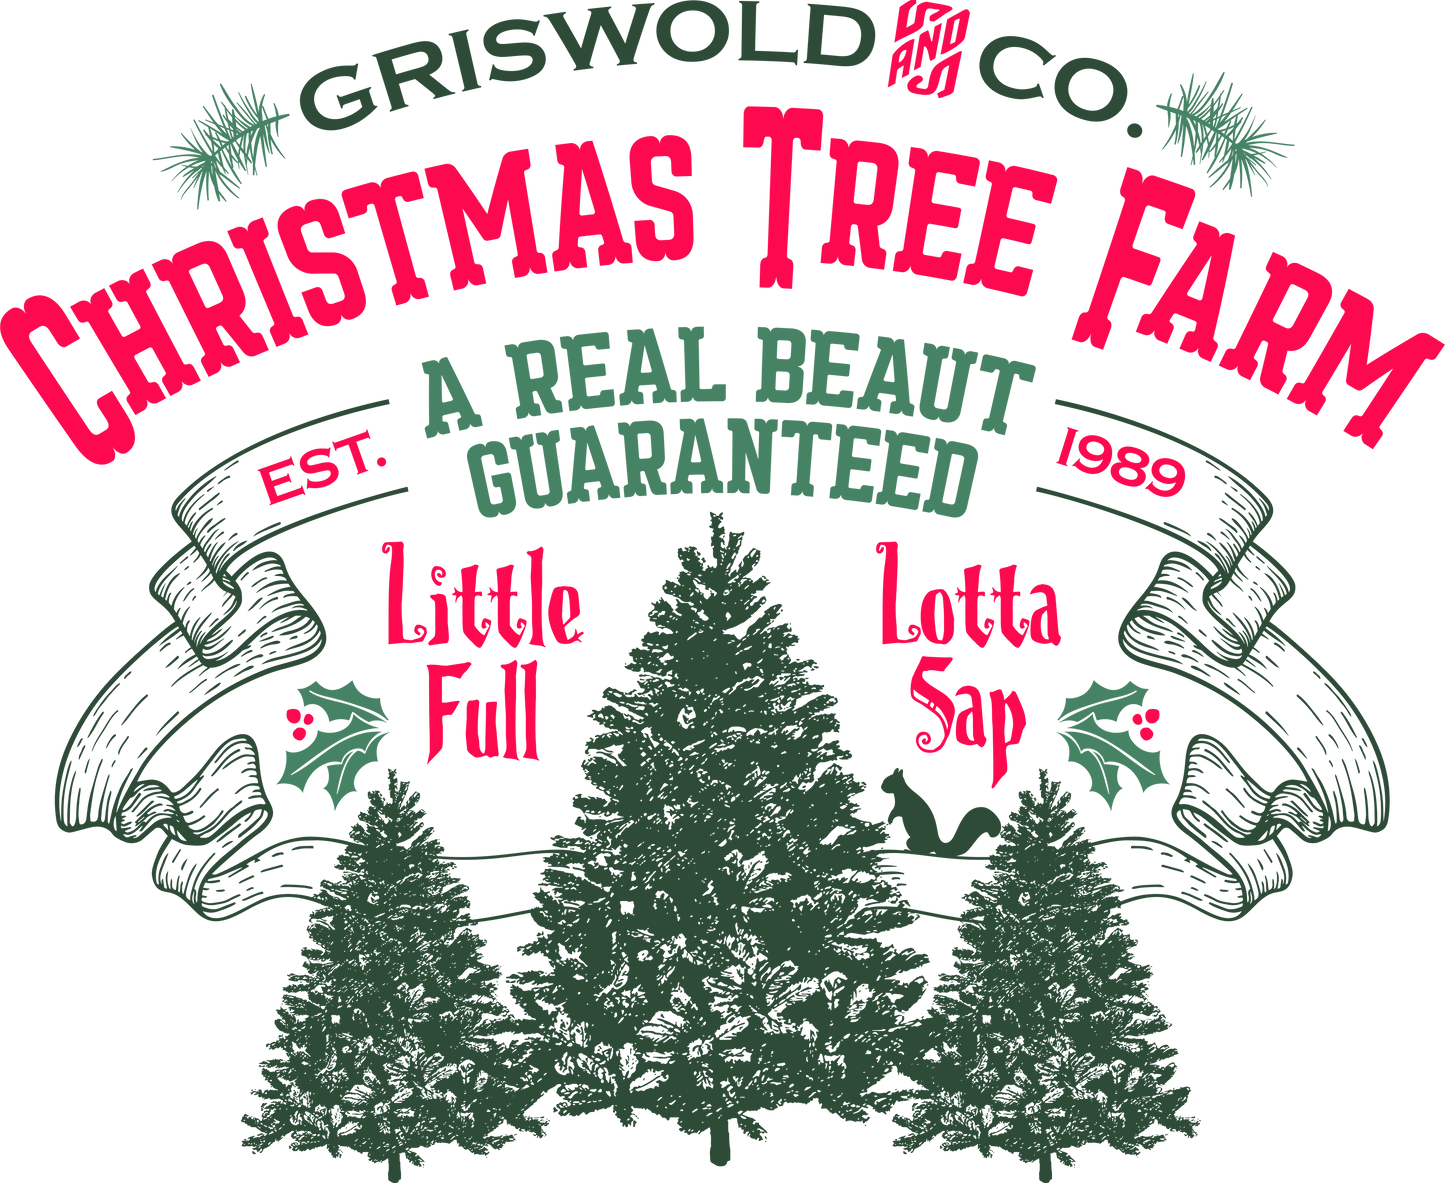 Griswold & Co. Christmas Tree Farm